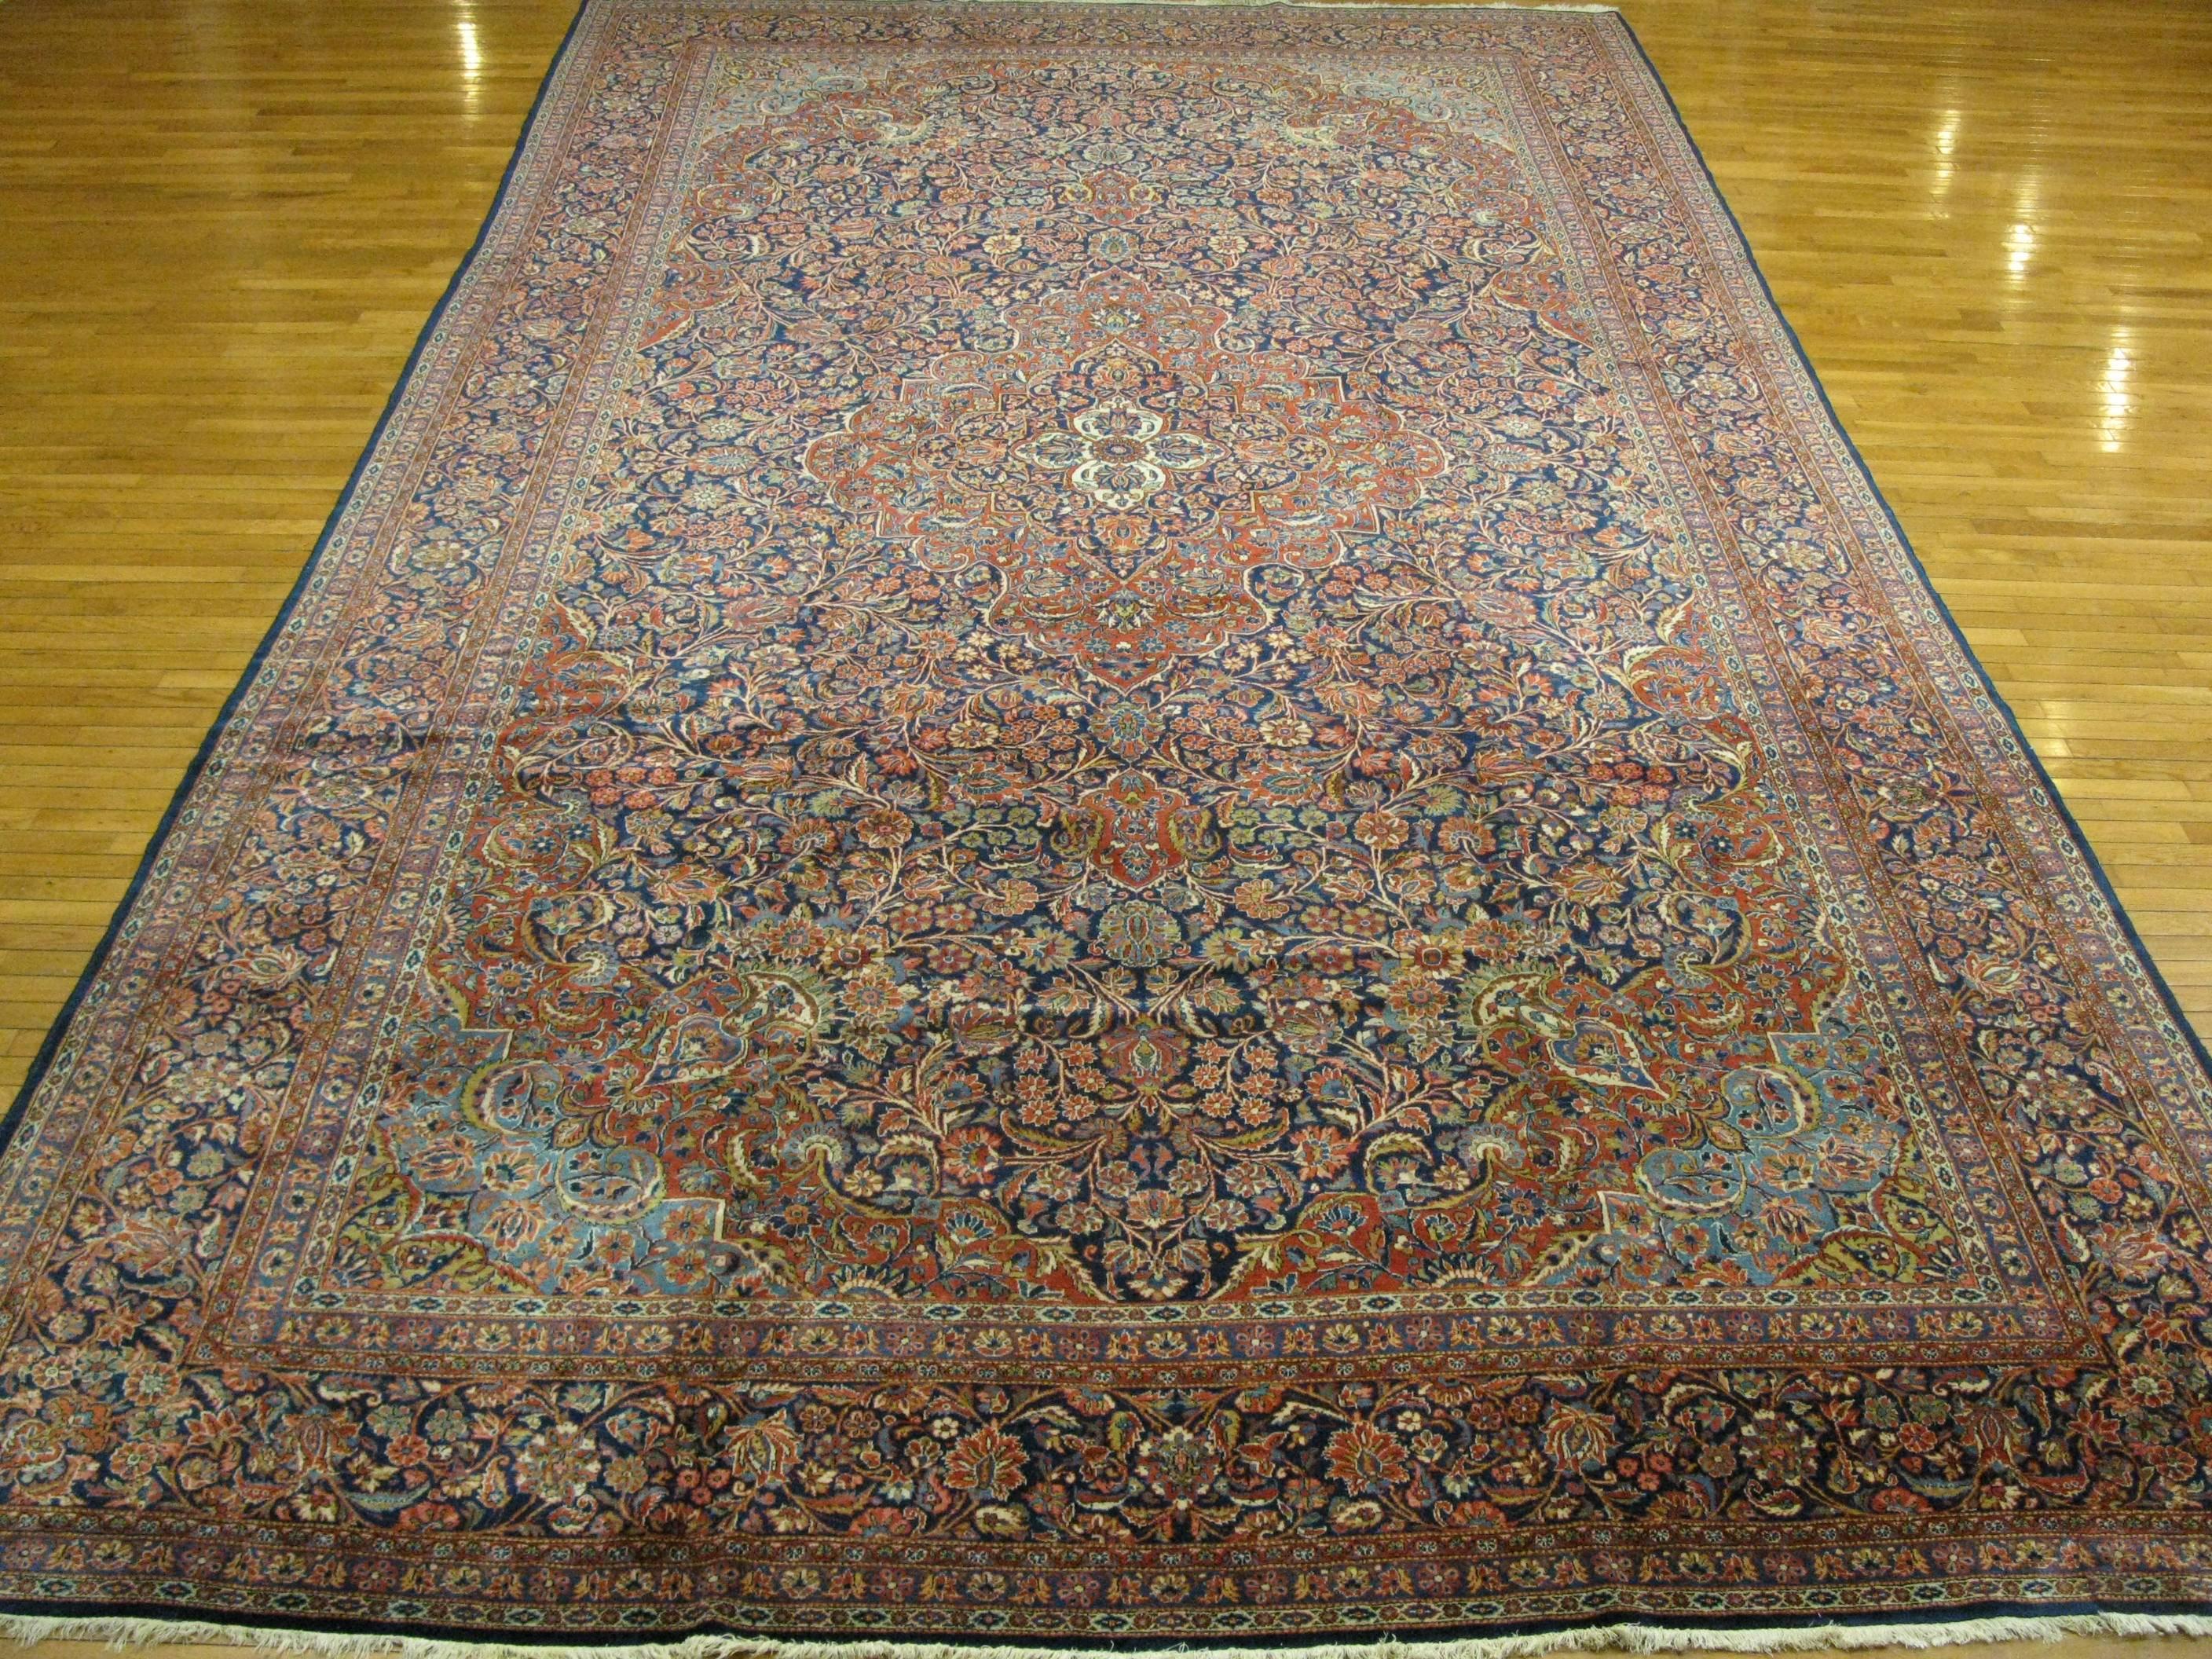 This is a fabulous antique hand-knotted Persian Kashan rug. It has a beautiful intricate floral pattern in the traditional central and corner medallion design. It is very finely knotted with wool colored with natural dyes. The rug is in great